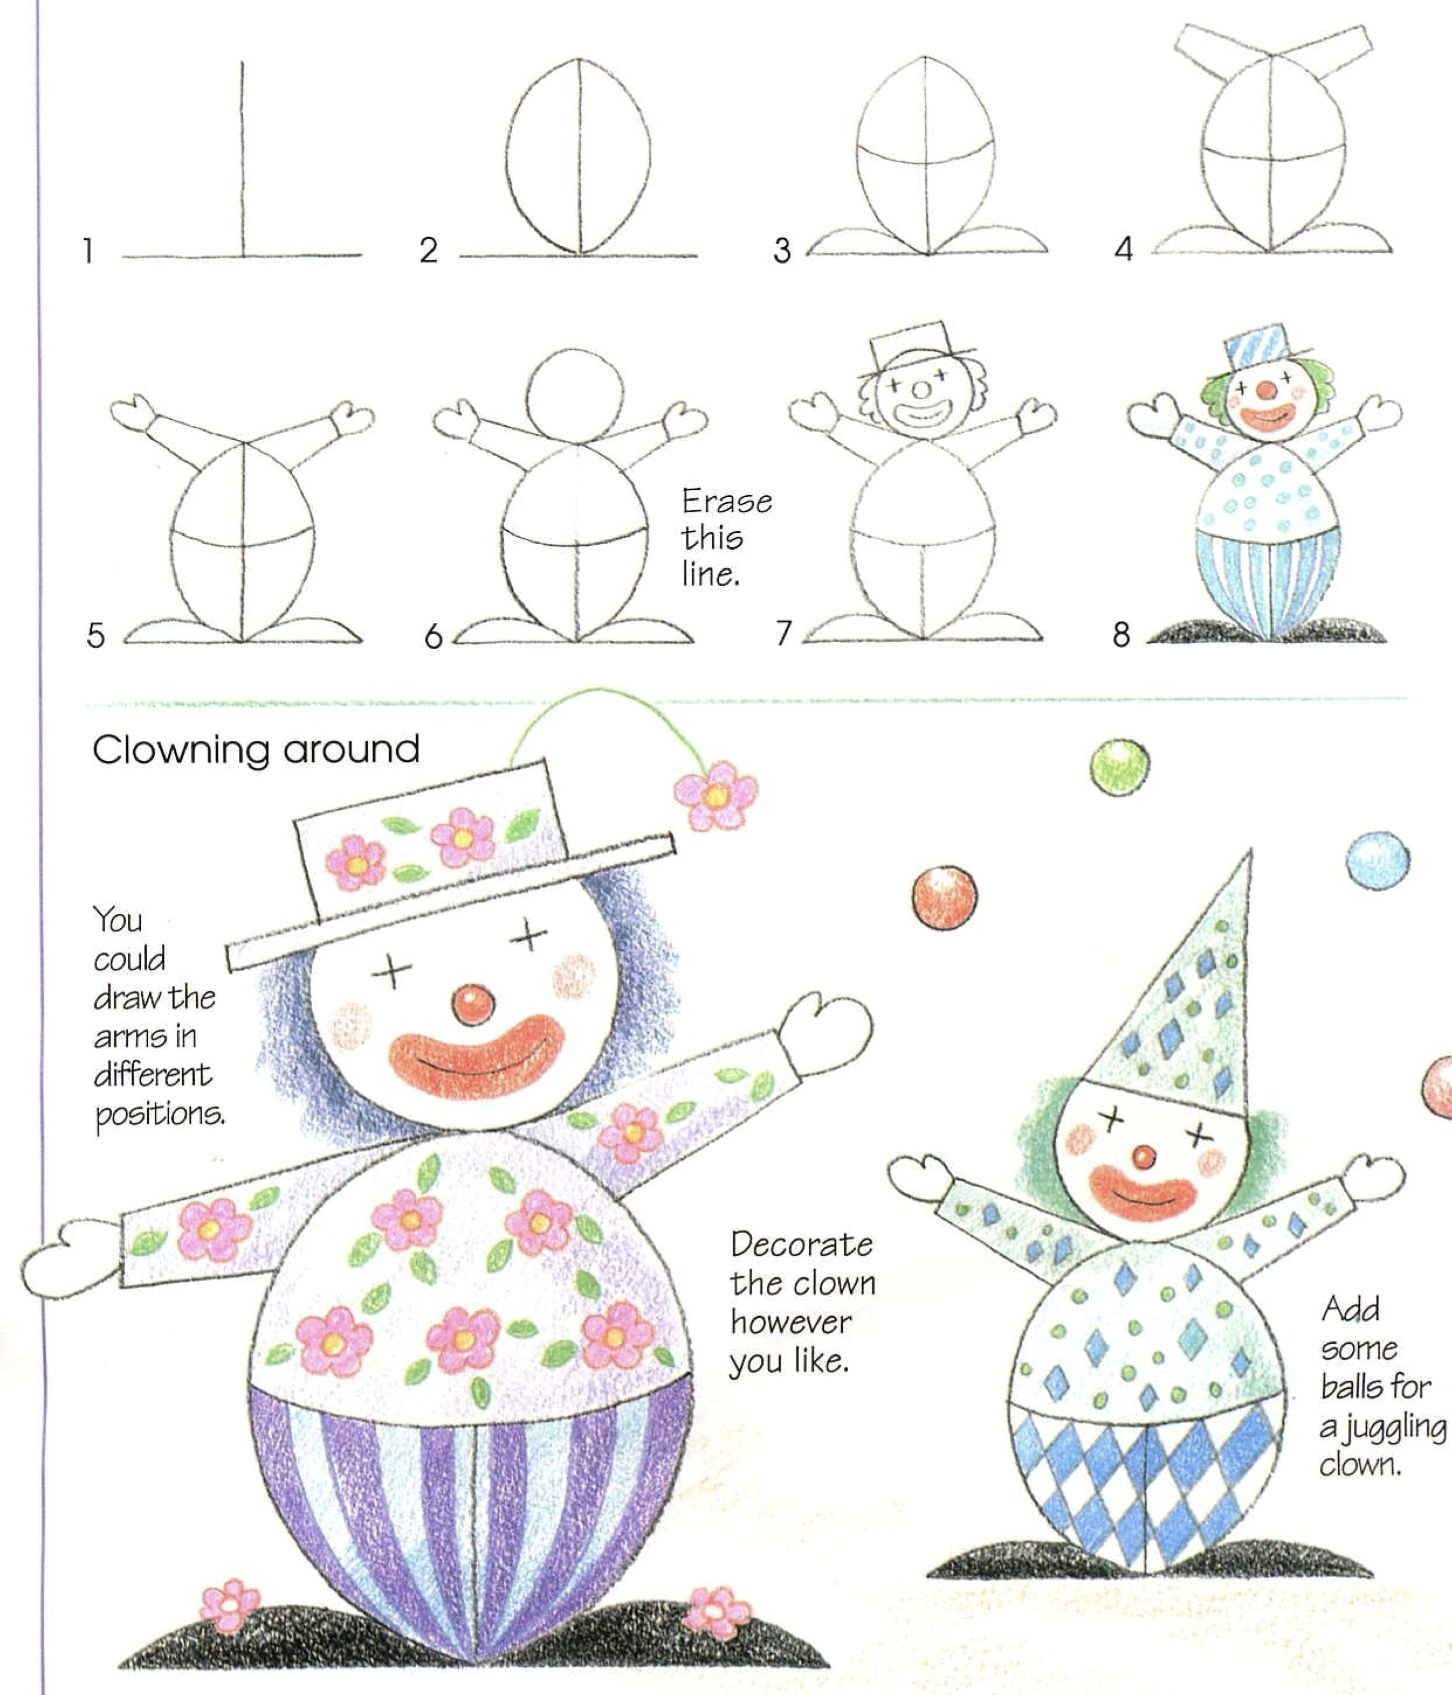 Easy Drawings for 5th Graders 2016 09 En Klovn How to Draw Any Pics Etc Pinterest Easy